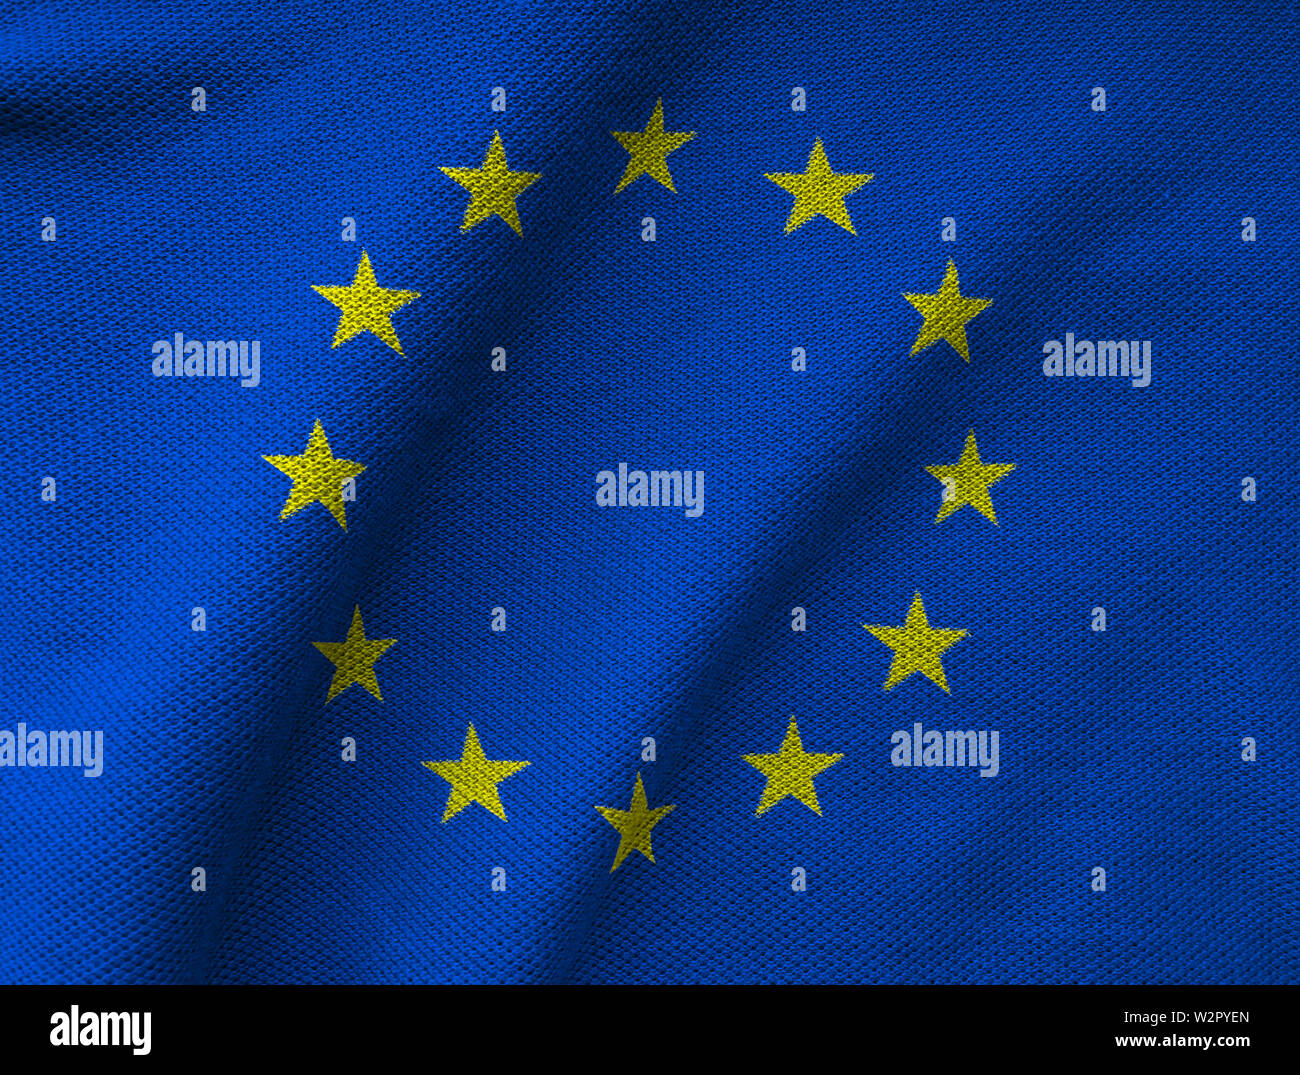 the EU flag printed on a textured Jersey knit fabric. European Union background Stock Photo